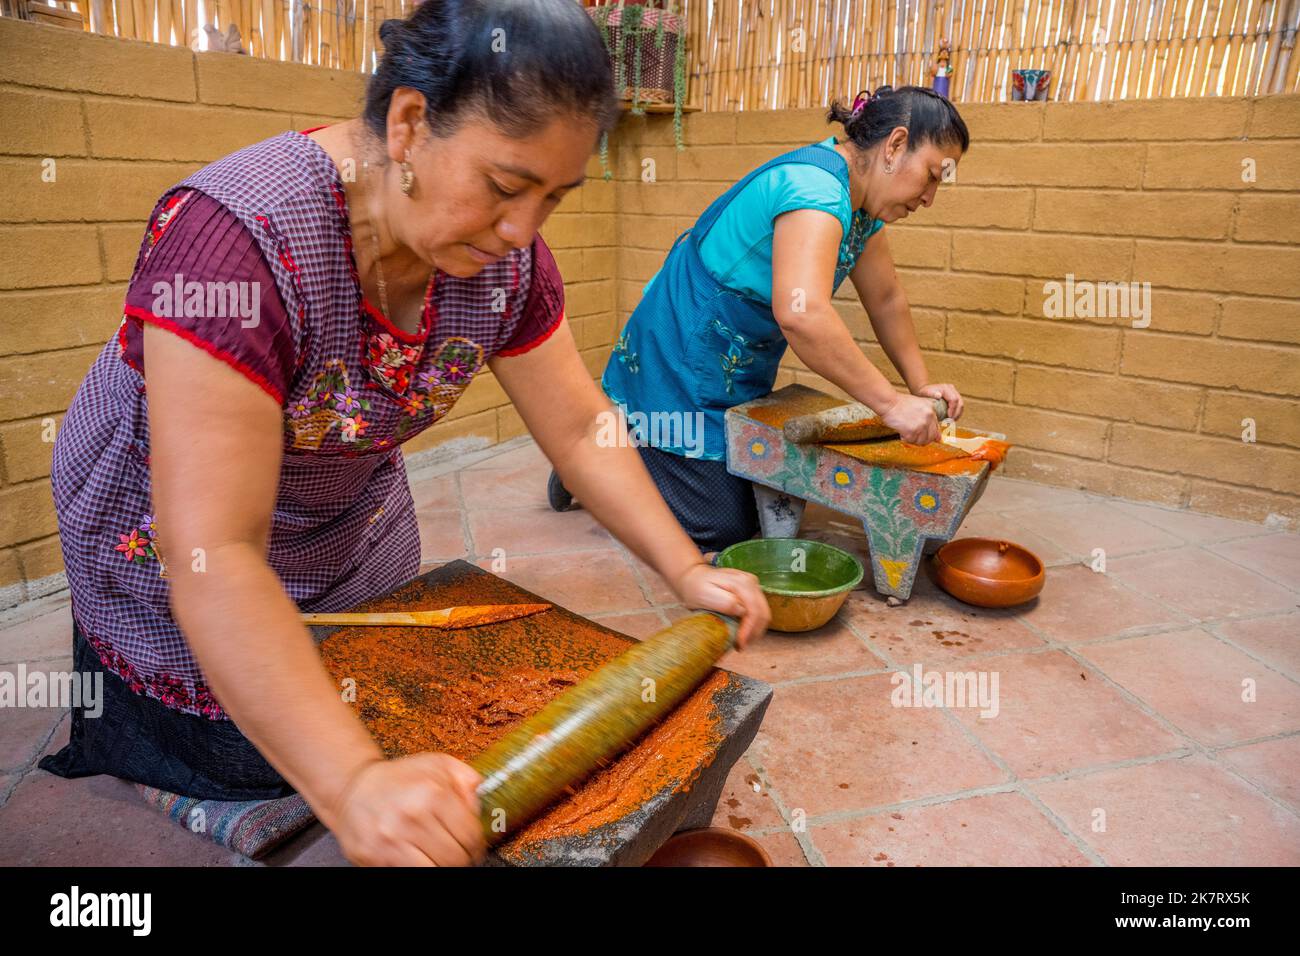 Reina, the owner of El Sabor Zapoteco cooking school in Teotitlan del Valle, a small town in the Valles Centrales Region near Oaxaca, southern Mexico, Stock Photo